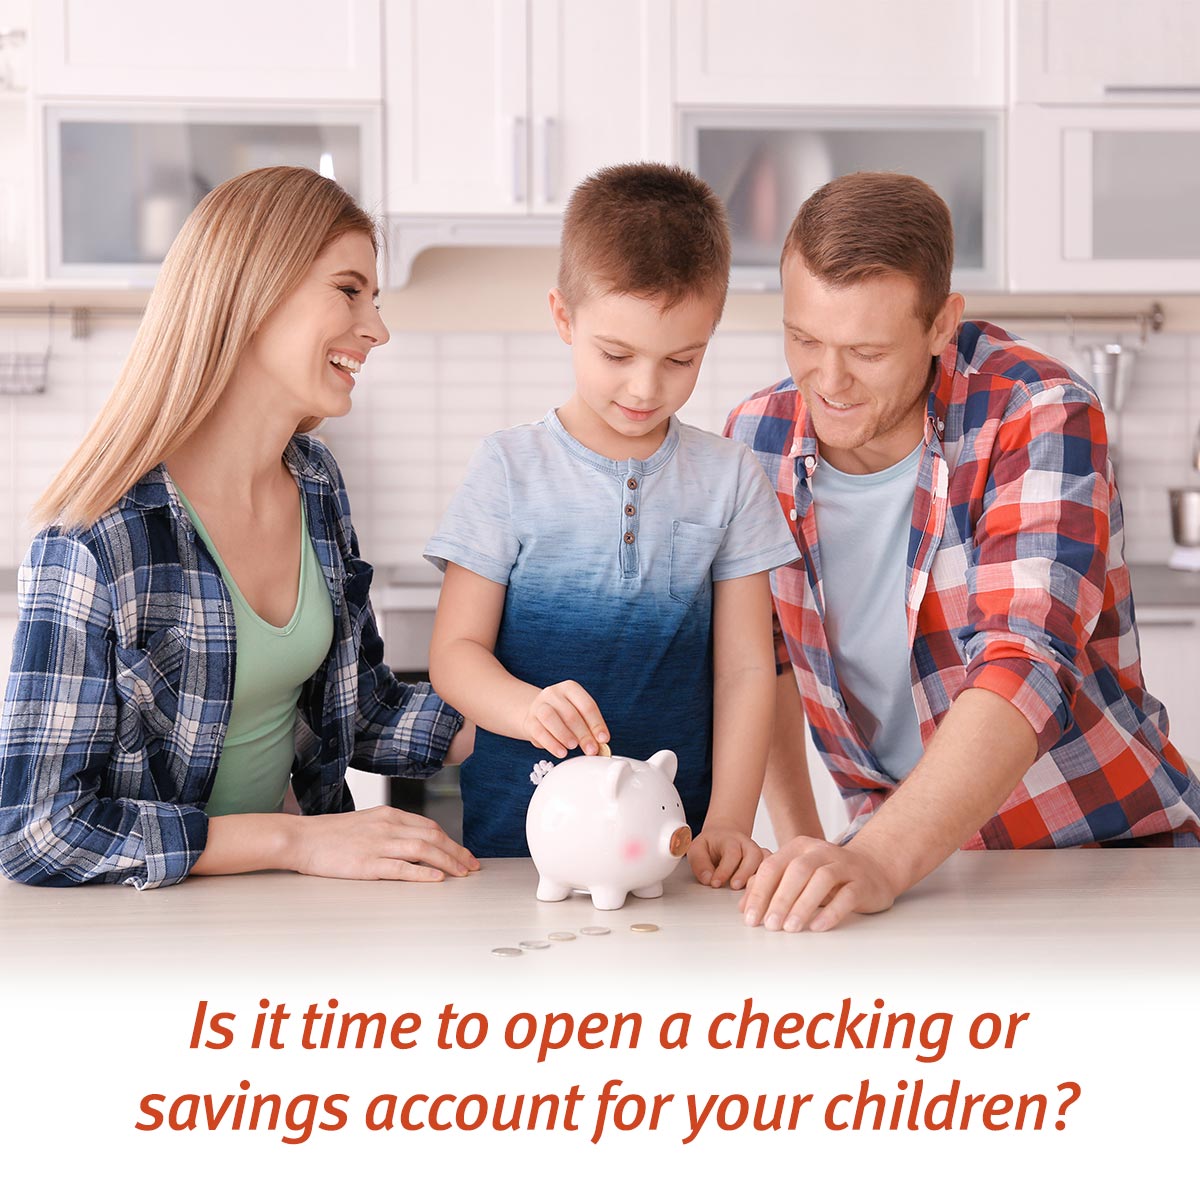 How Financially Savvy are Your Children?